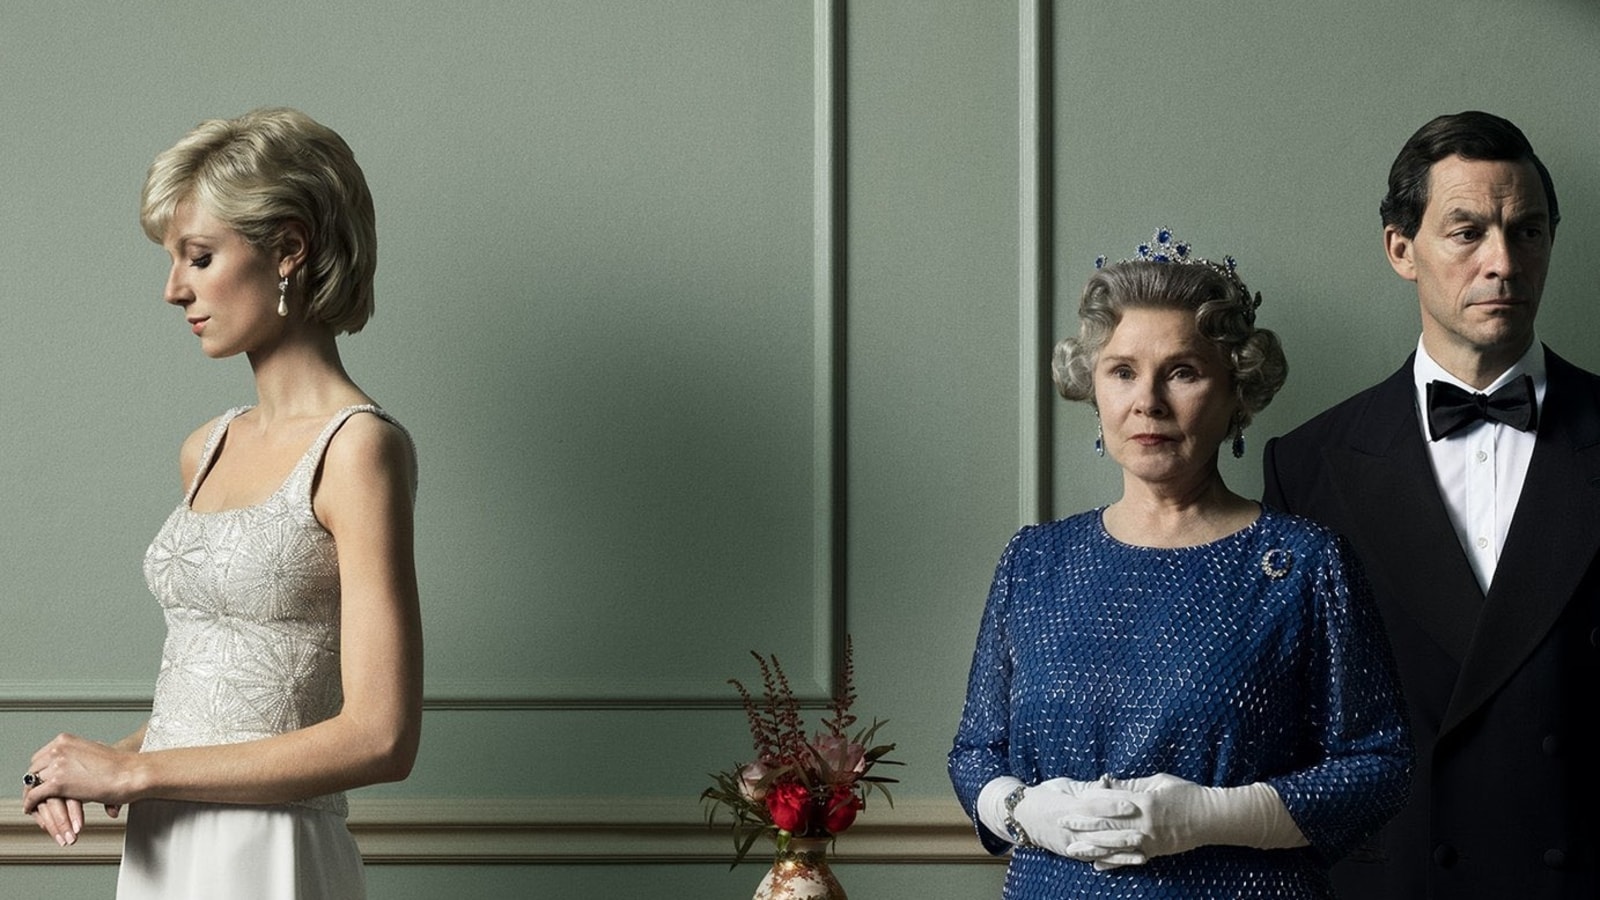 Exploring 'The Crown's' Journey From Groundbreaking Royal Drama to Headline Chaser